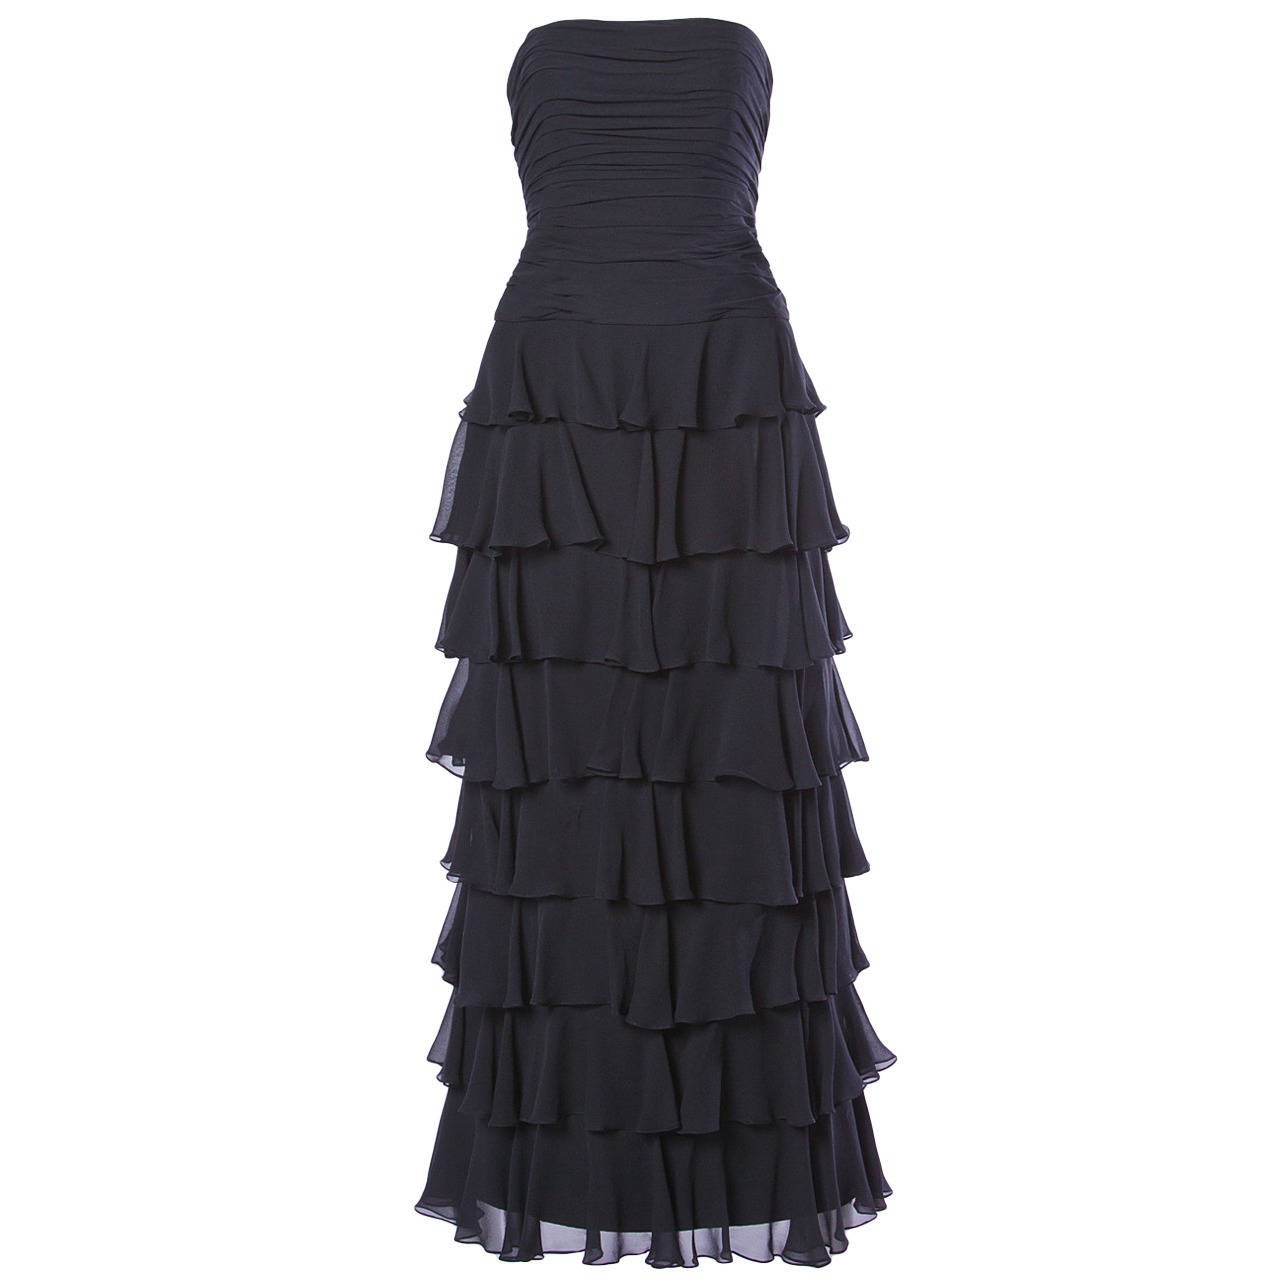 This strapless tiered silk gown by Lillie Rubin comes with a matching wrap. Ruched structured bodice. Rear zip closure.

Details:
Fully Lined
Back Zip and Hook Closure
Marked Size: 4
Color: Black
Fabric: Silk

Dress Measurements:

Bust: 32